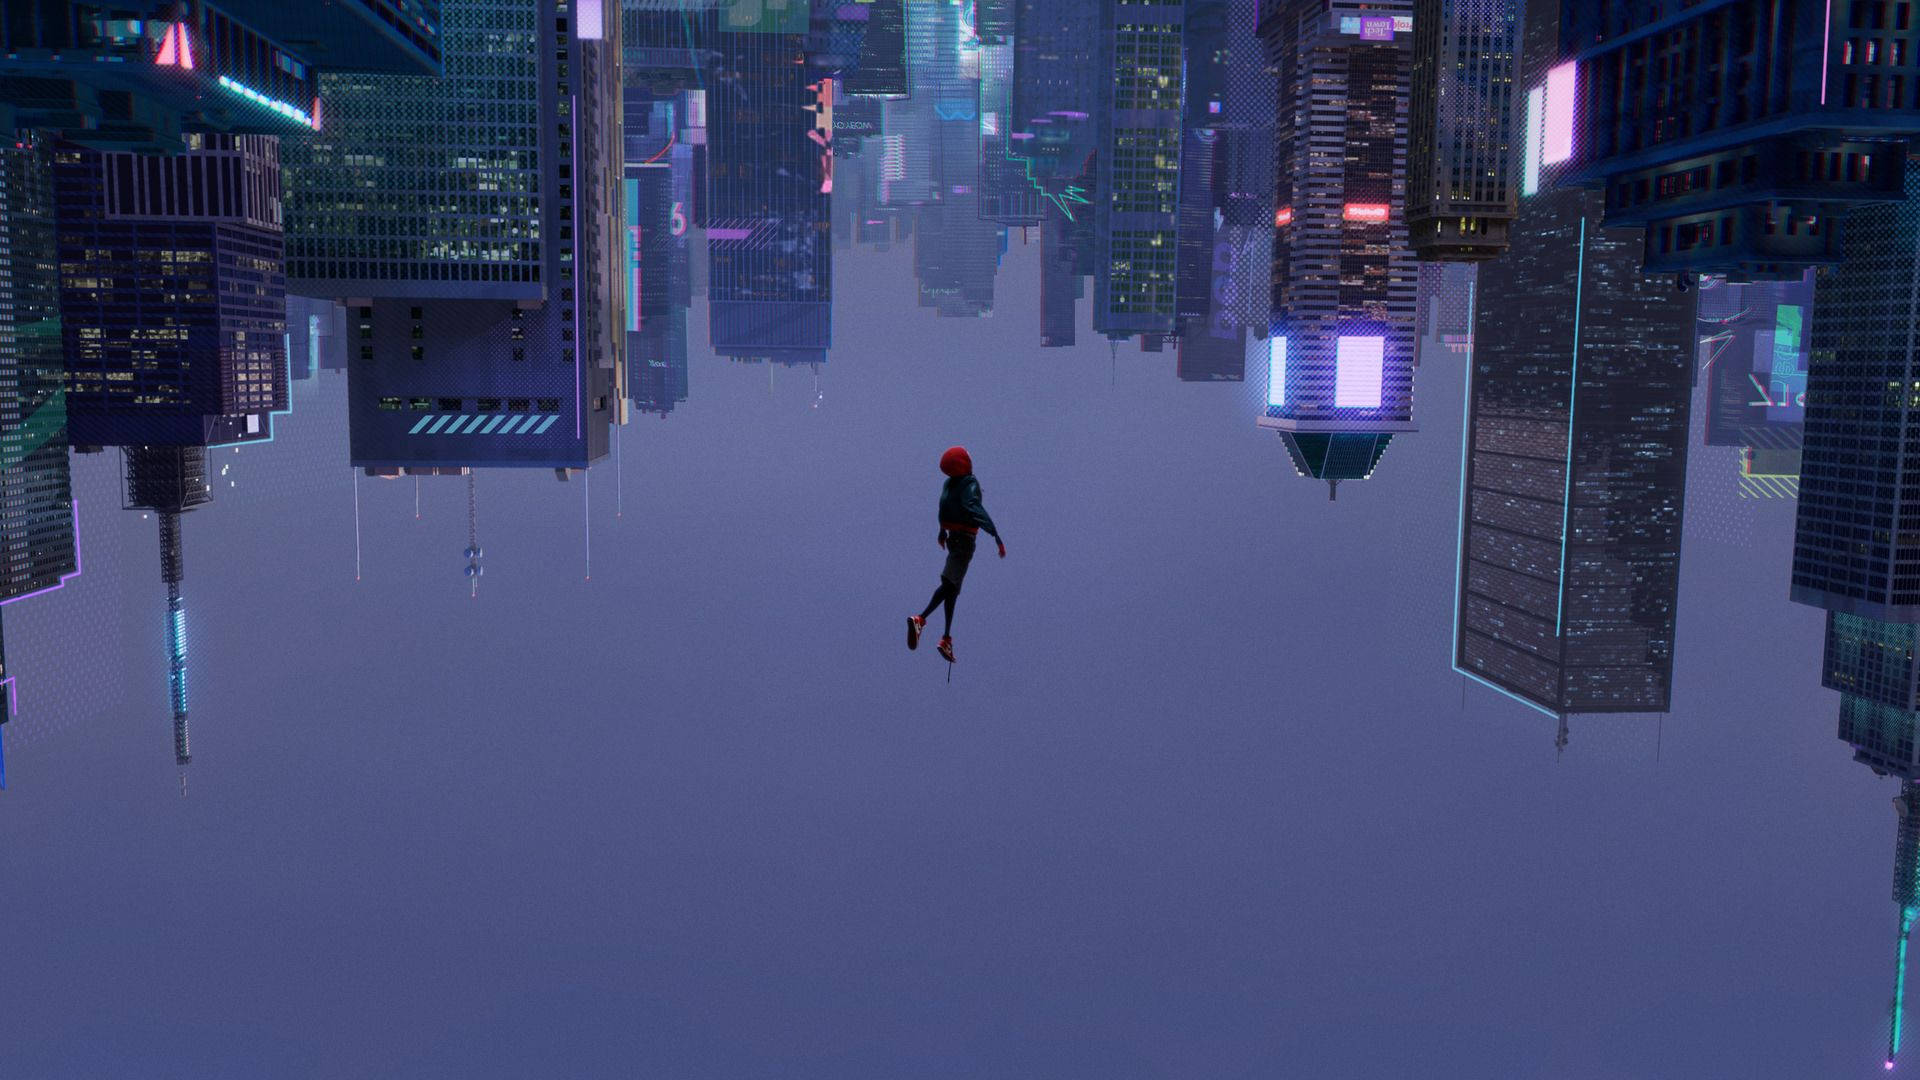 Miles Morales Upside Down City Background